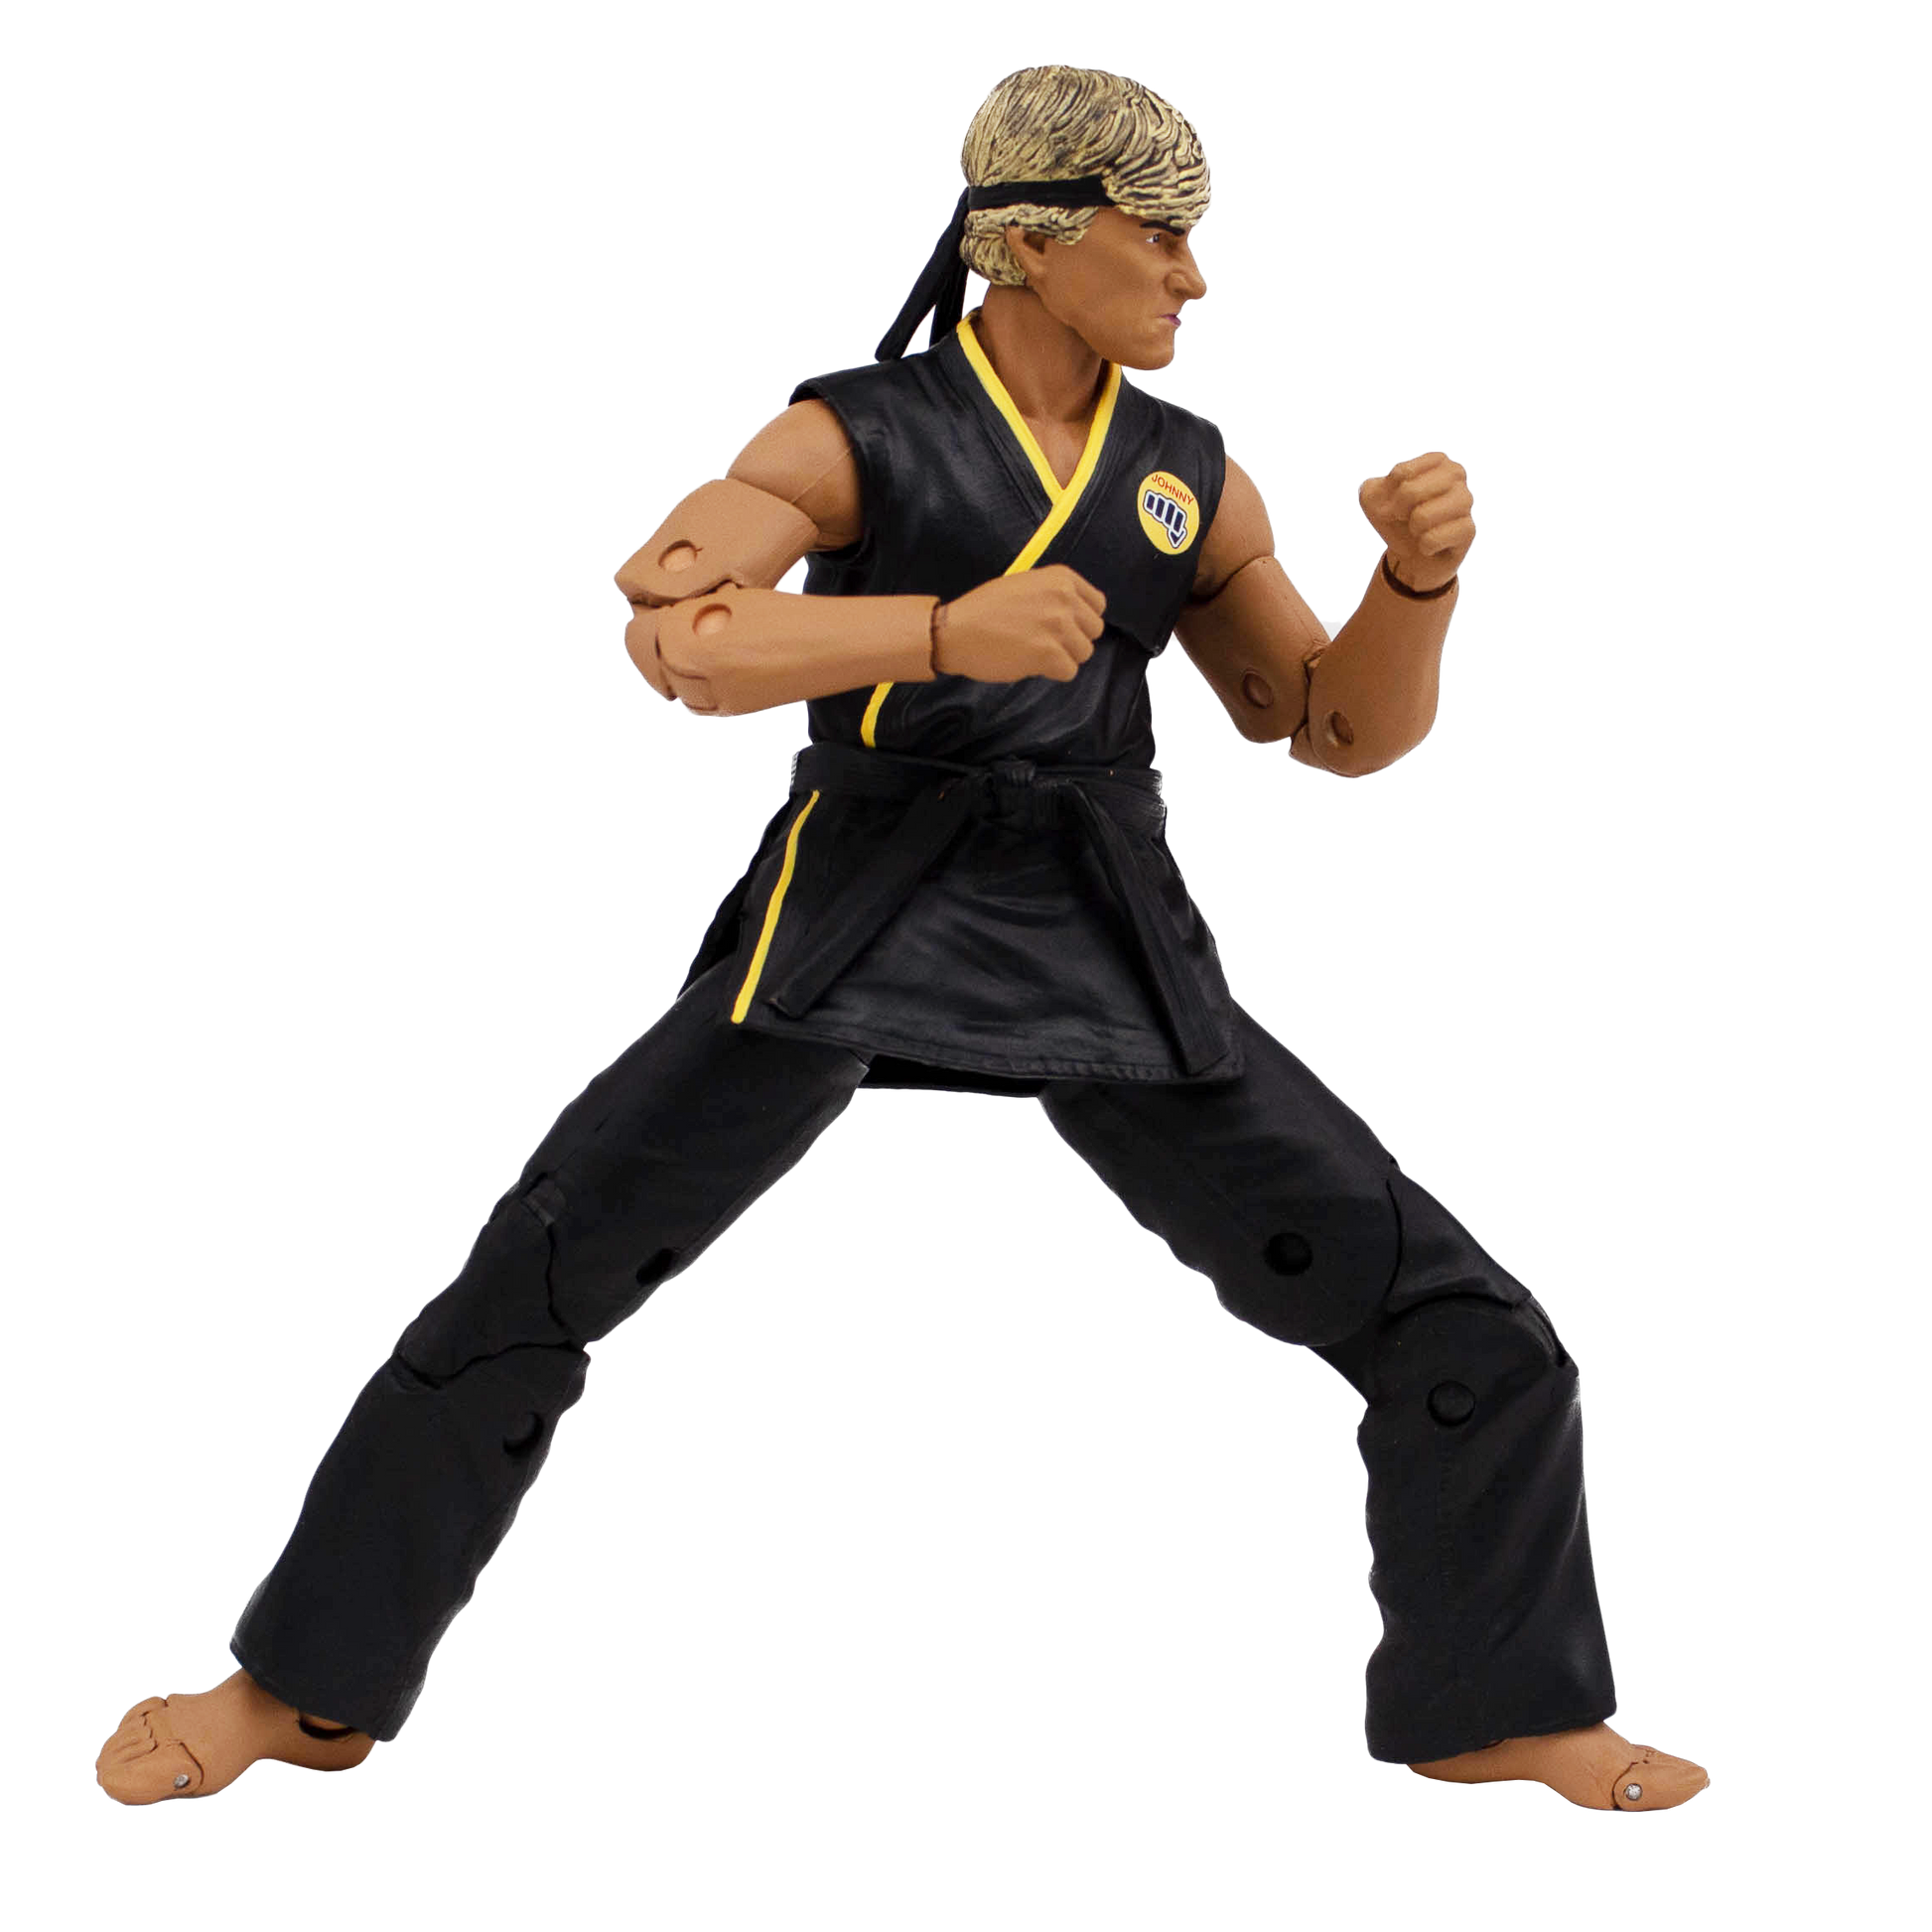 The Karate Kid Johnny Lawrence Action Figure - Available 3rd Quarter 2021 - Icon Heroes 